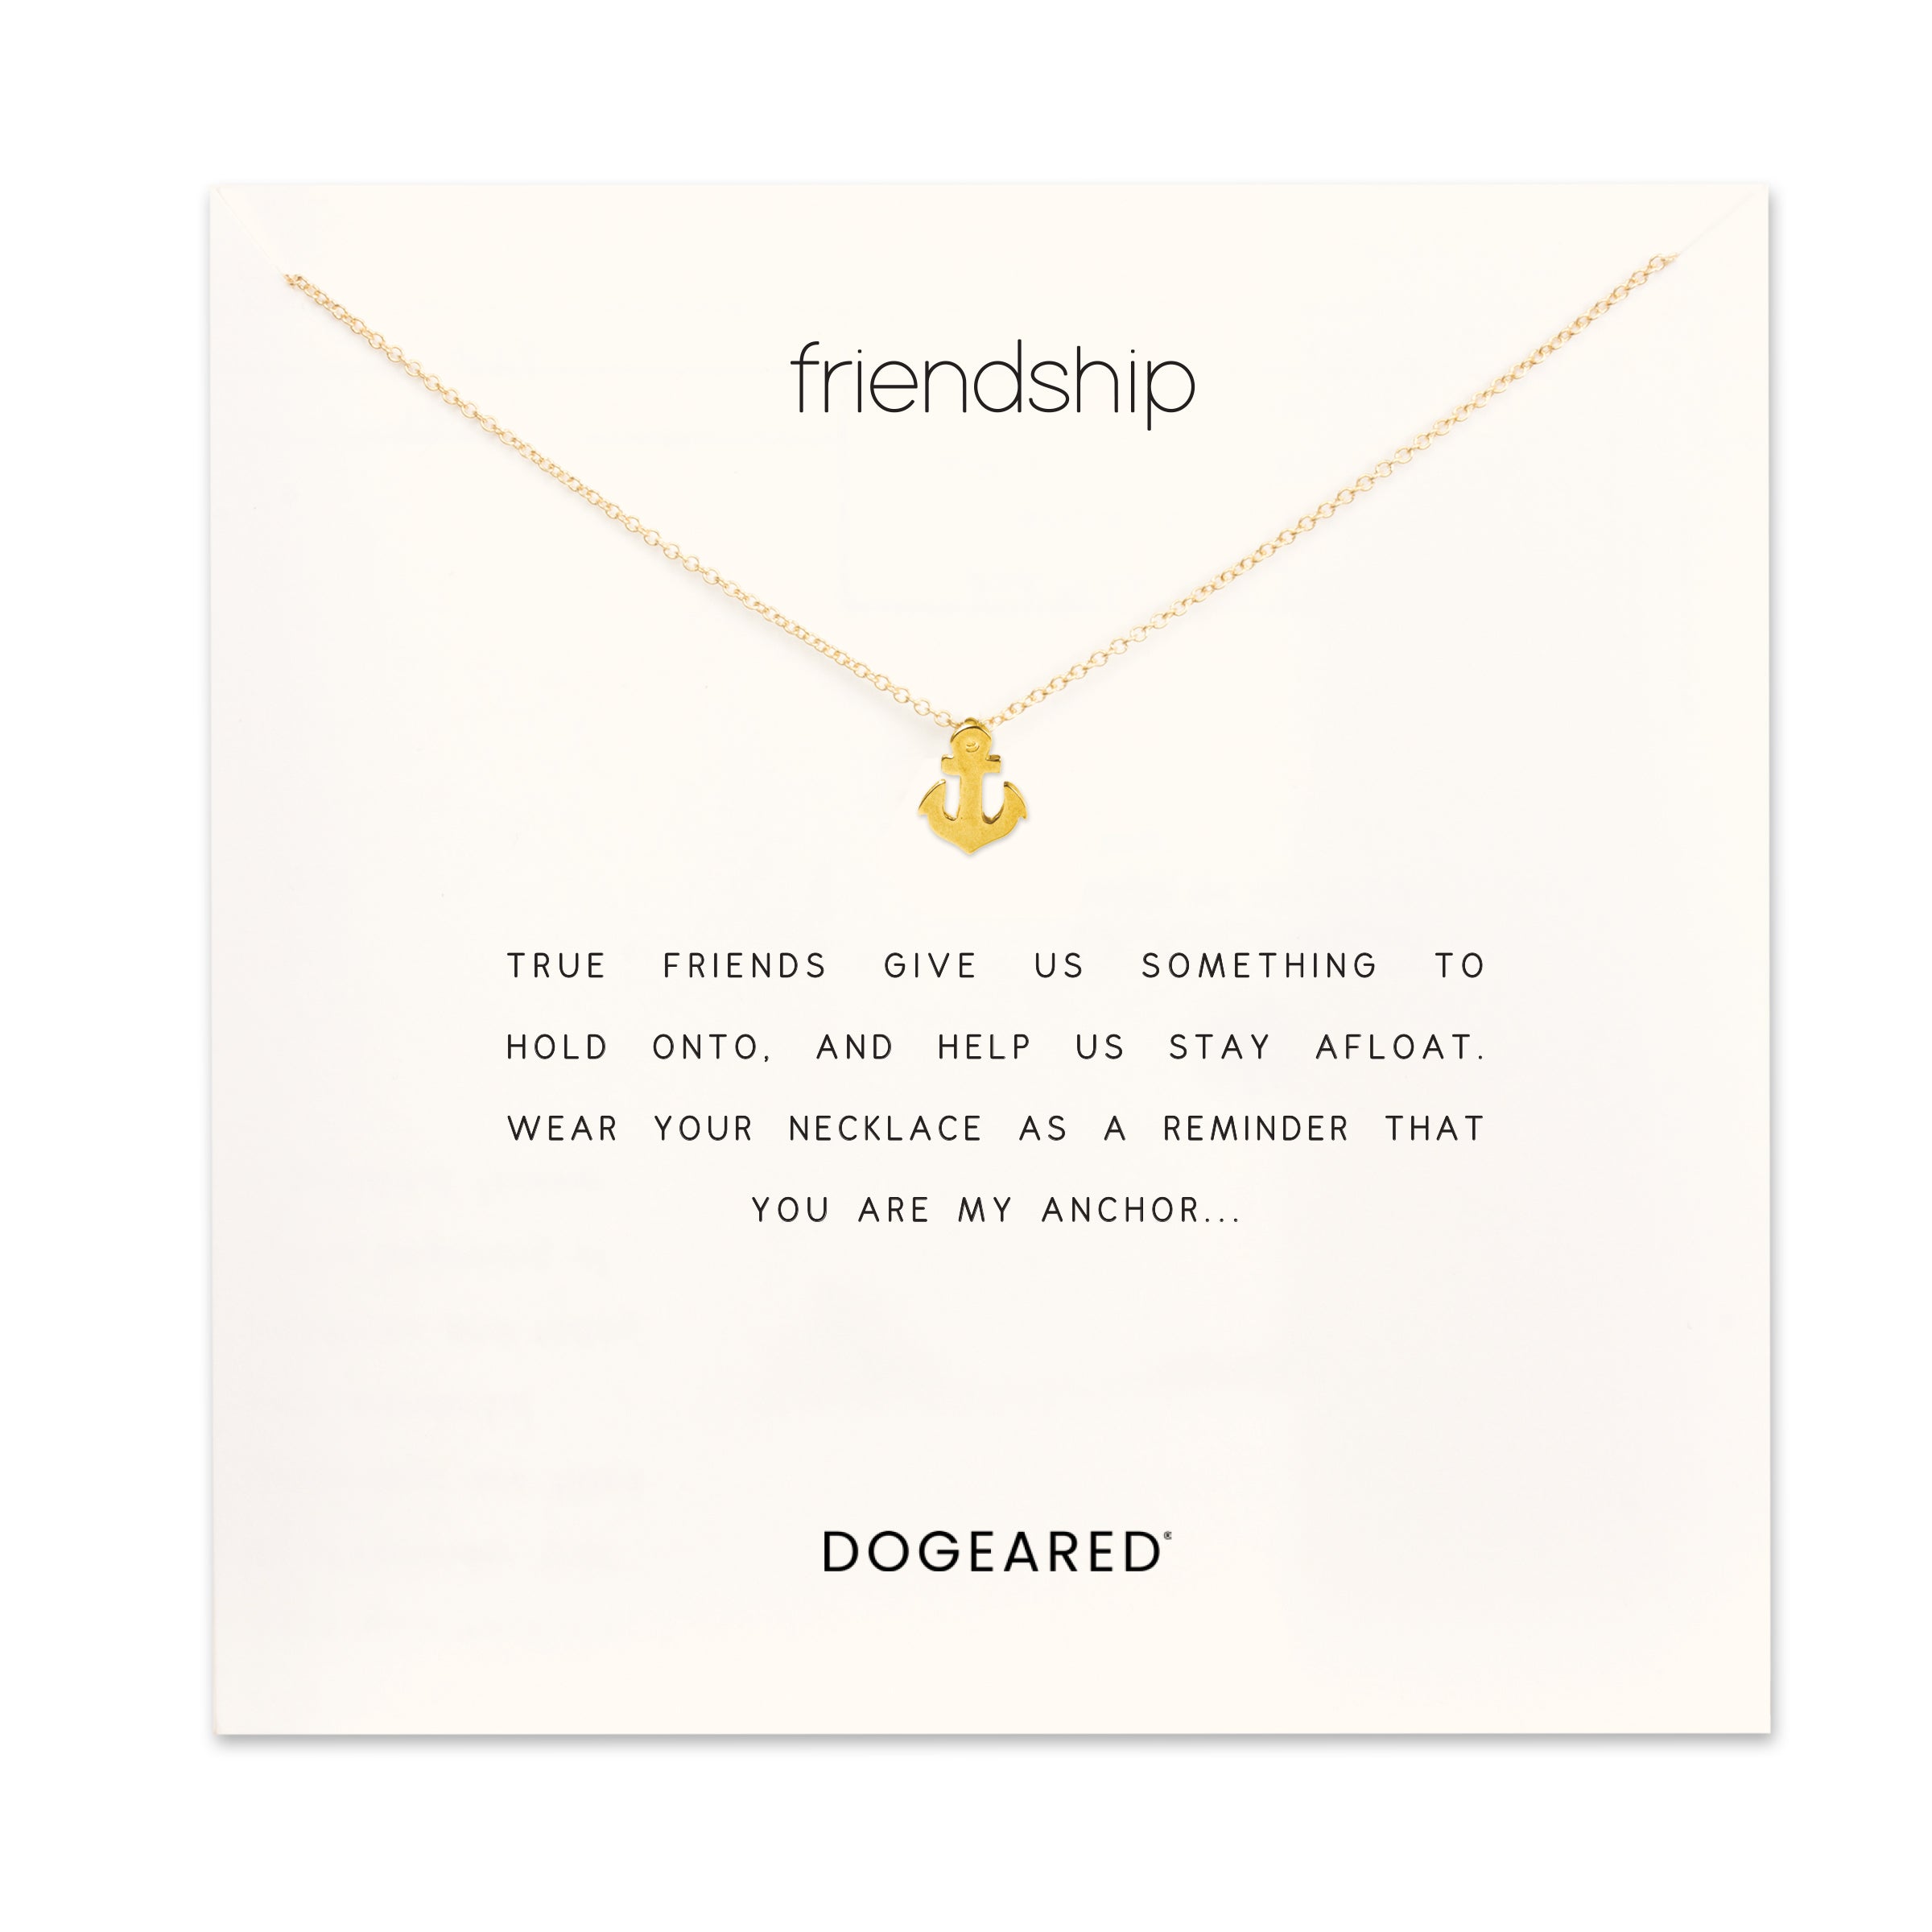 Friendship anchor necklace - Dogeared